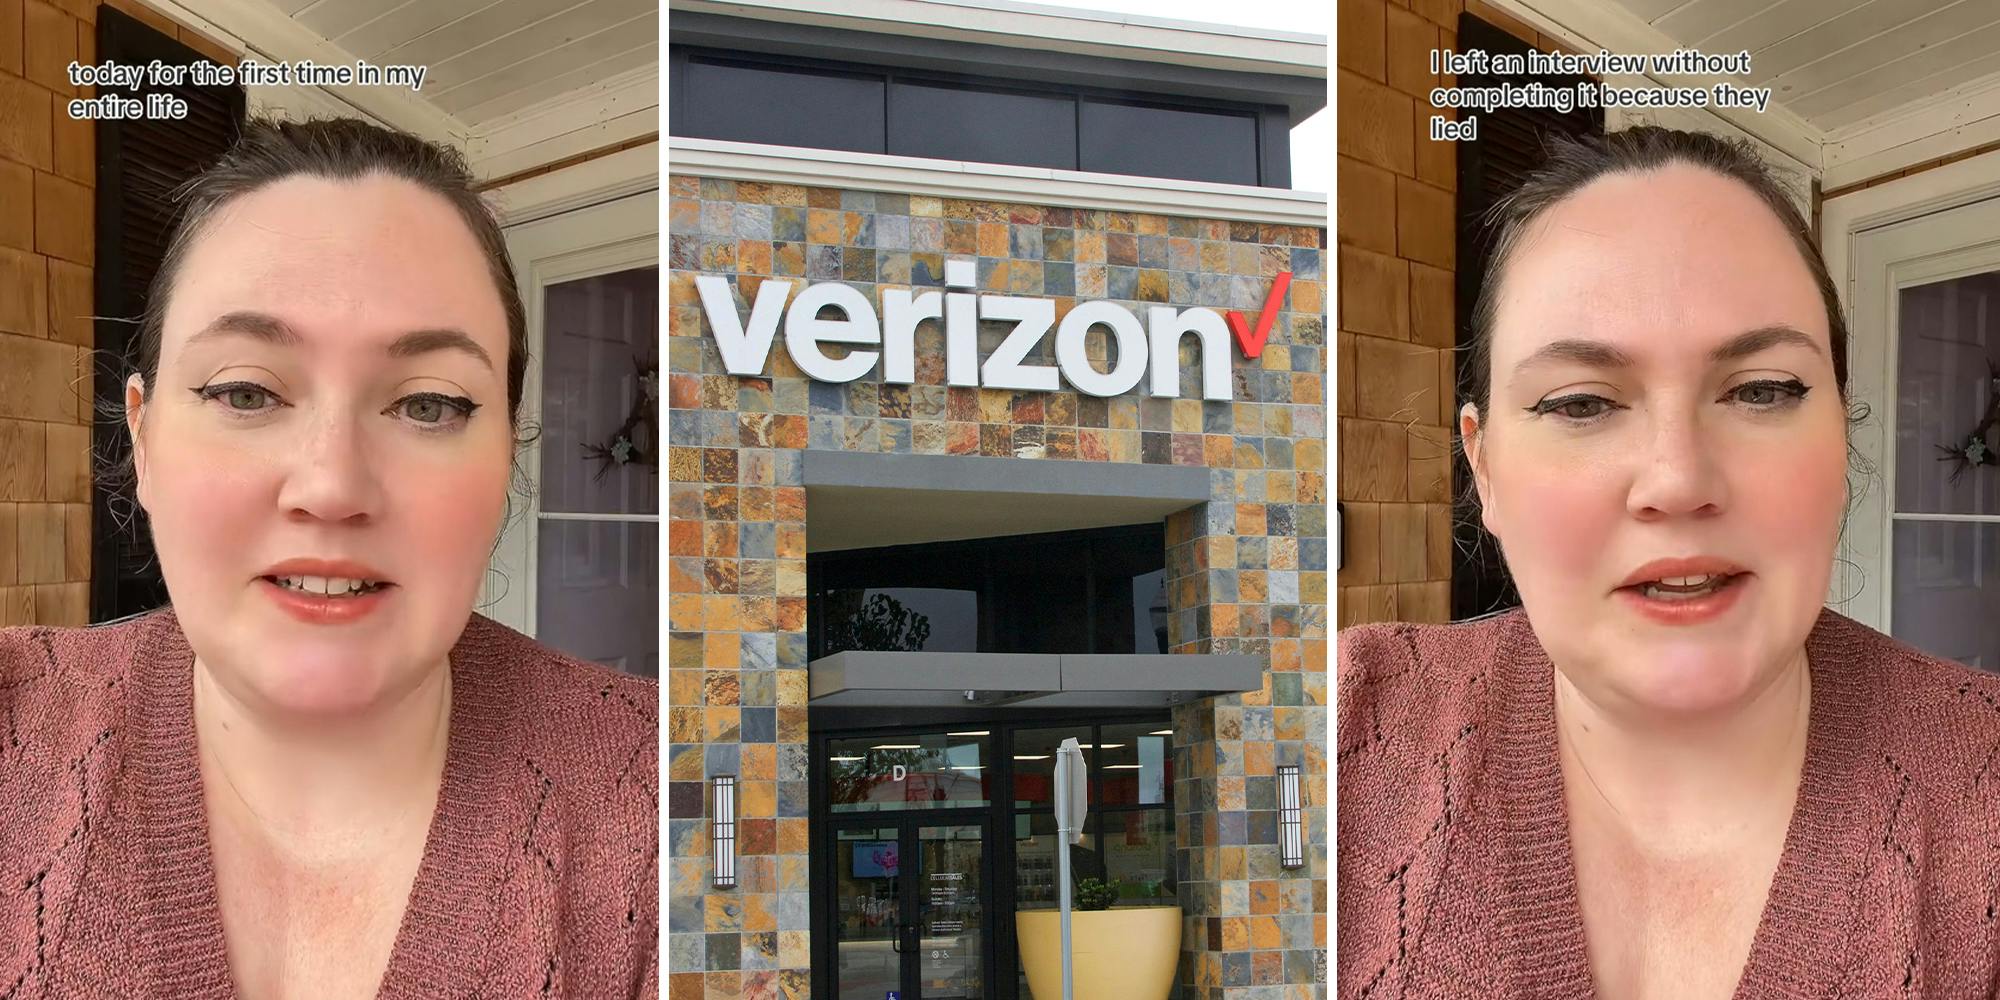 Job hunter shows up to interview at a Verizon franchise